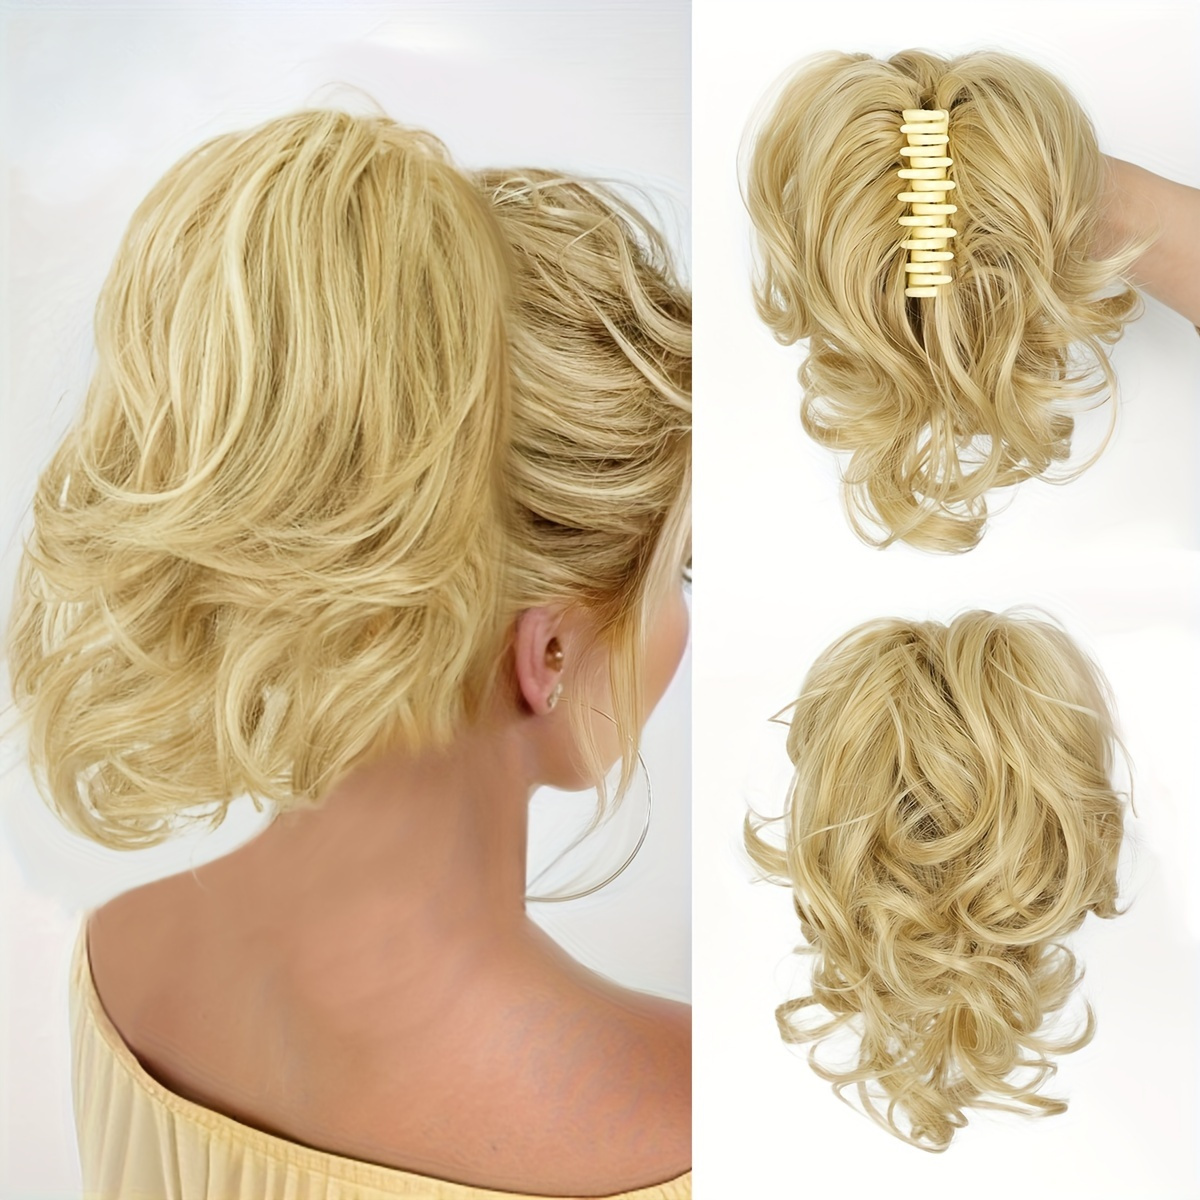 

Claw Ponytail Short Curly Wavy Ponytail Extensions Synthetic Clip In Hair Extensions Elegant For Daily Use Hair Accessories